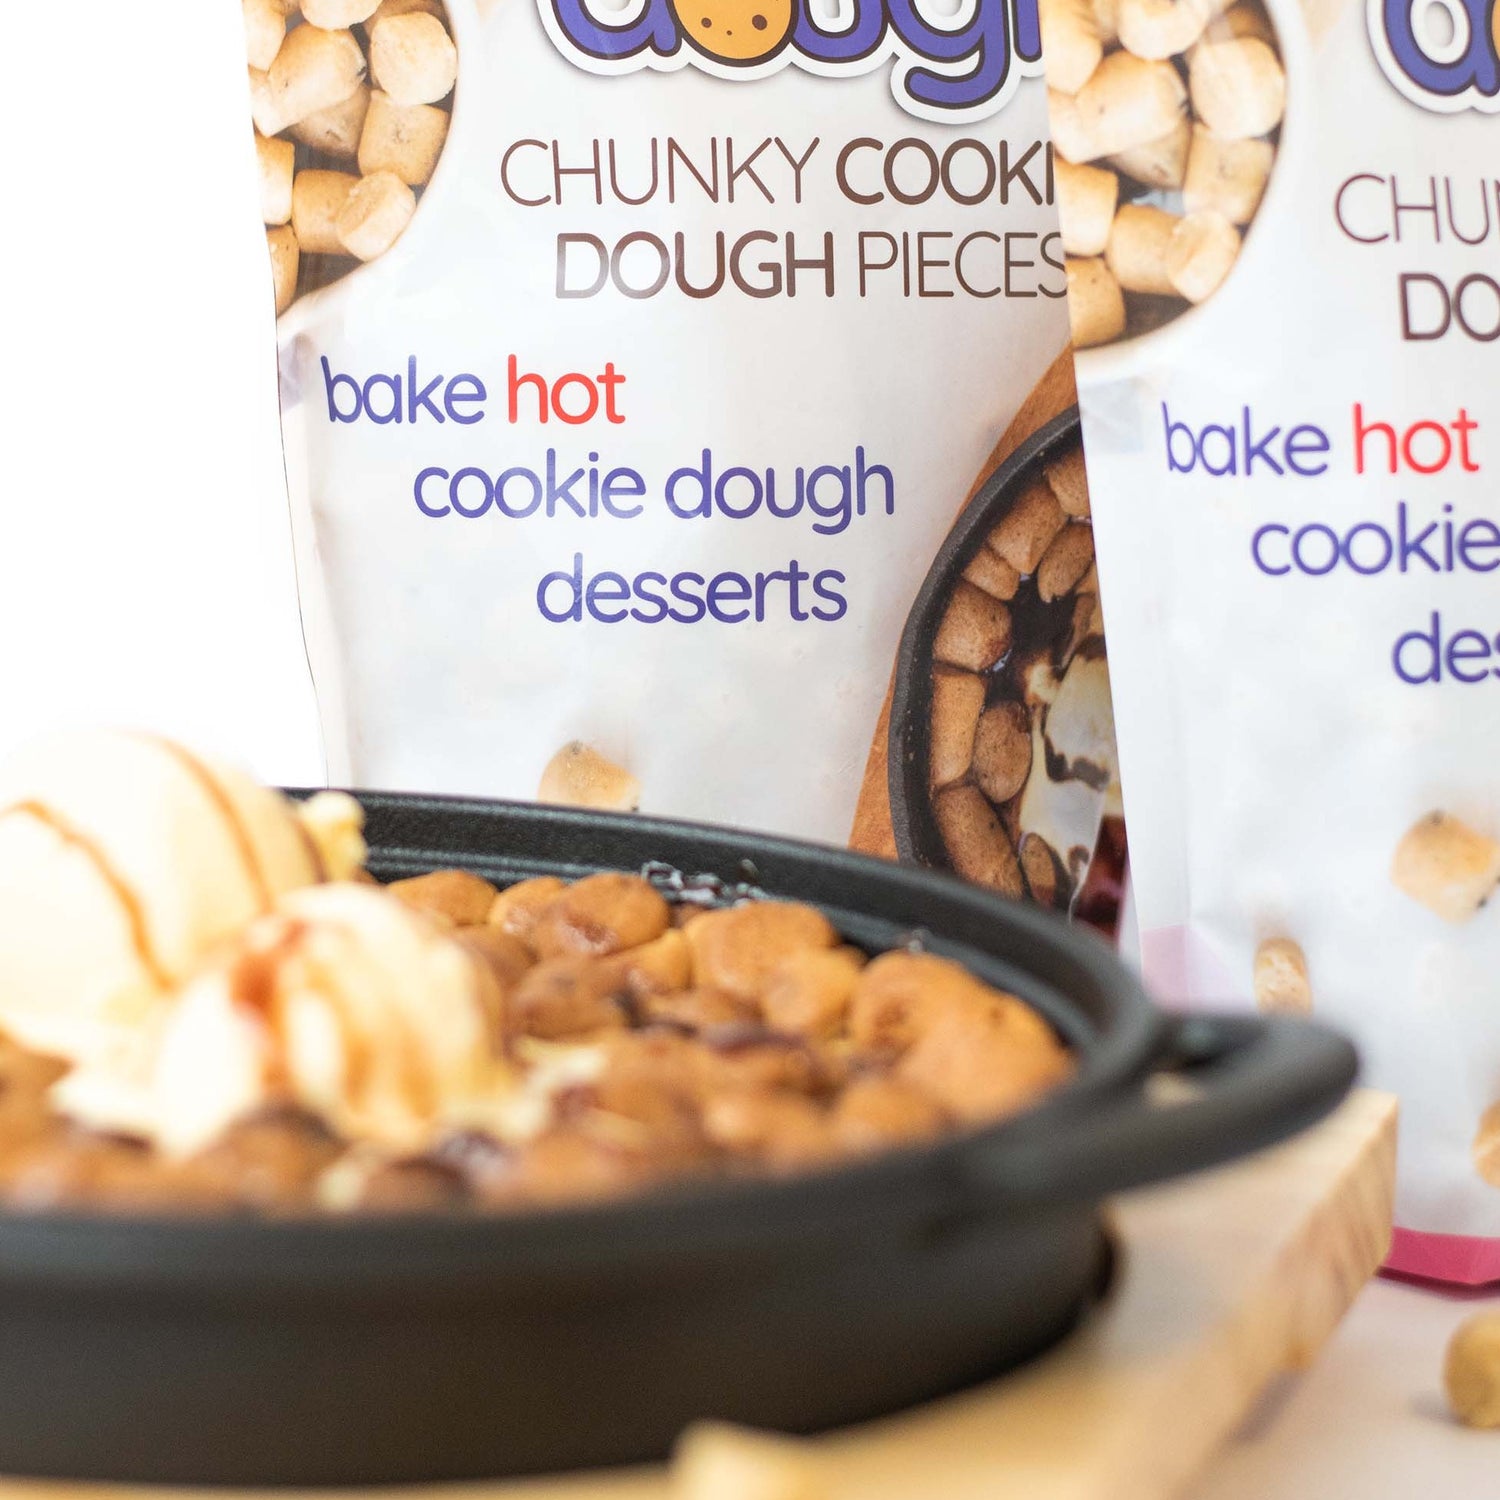 Bake at Home Hot Cookie Dough - Everyday Choc Chip Double Pouch Pack